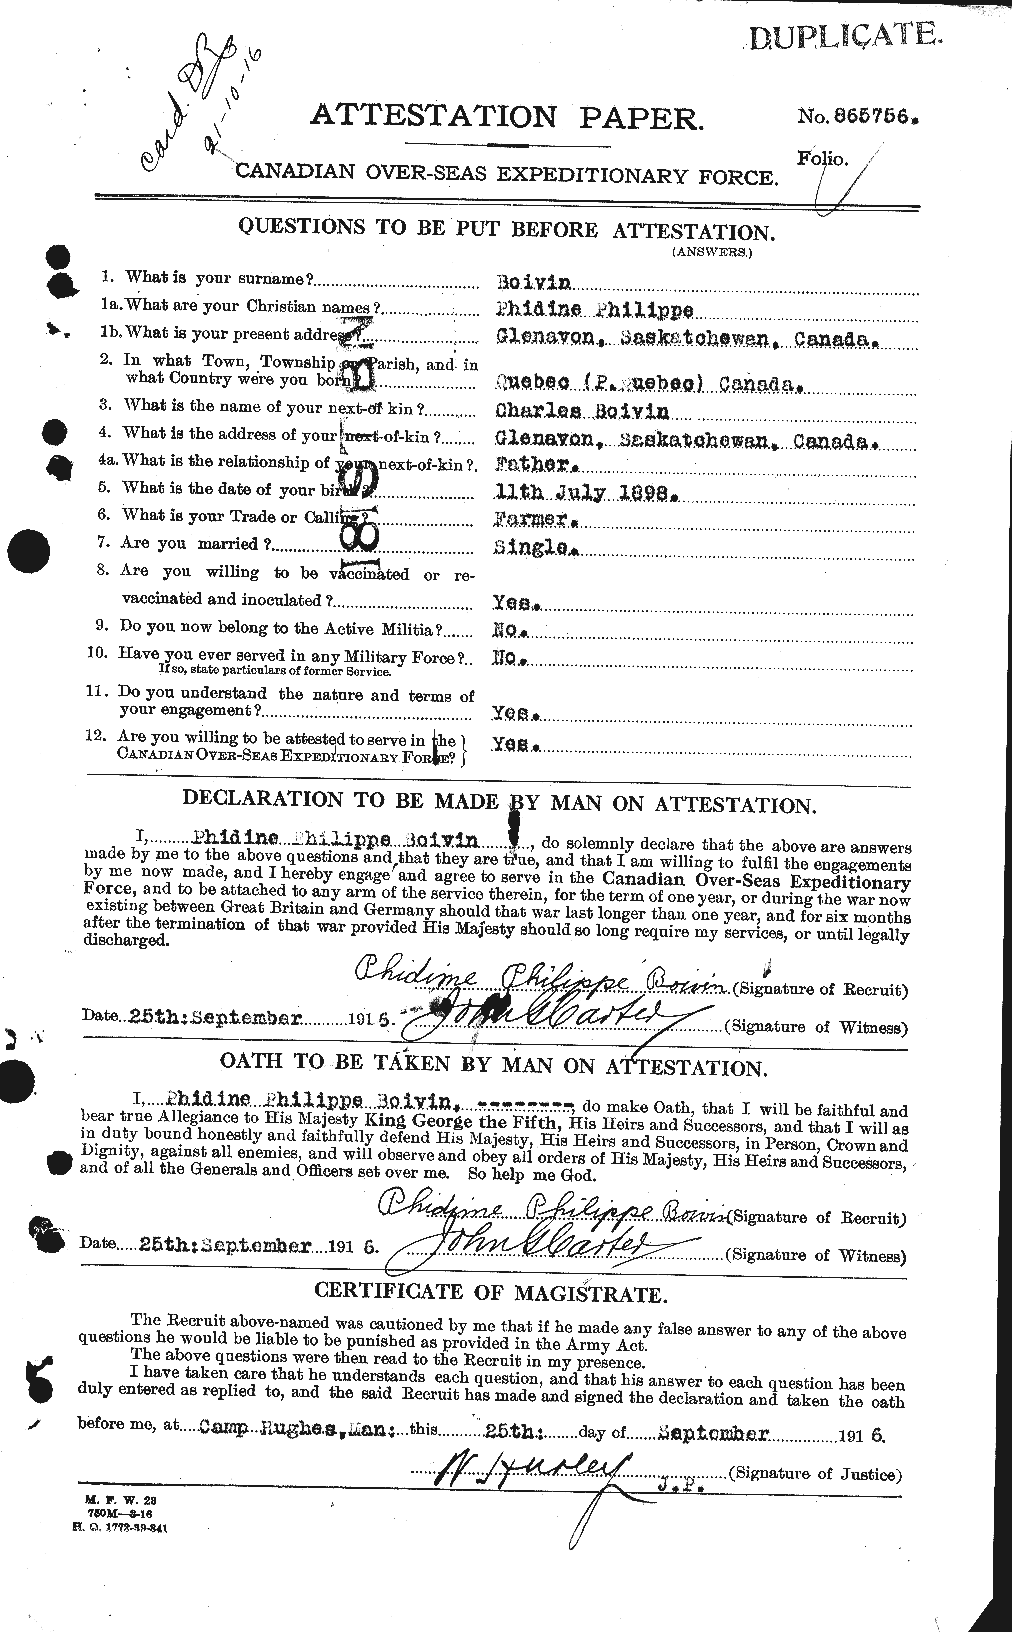 Personnel Records of the First World War - CEF 249602a